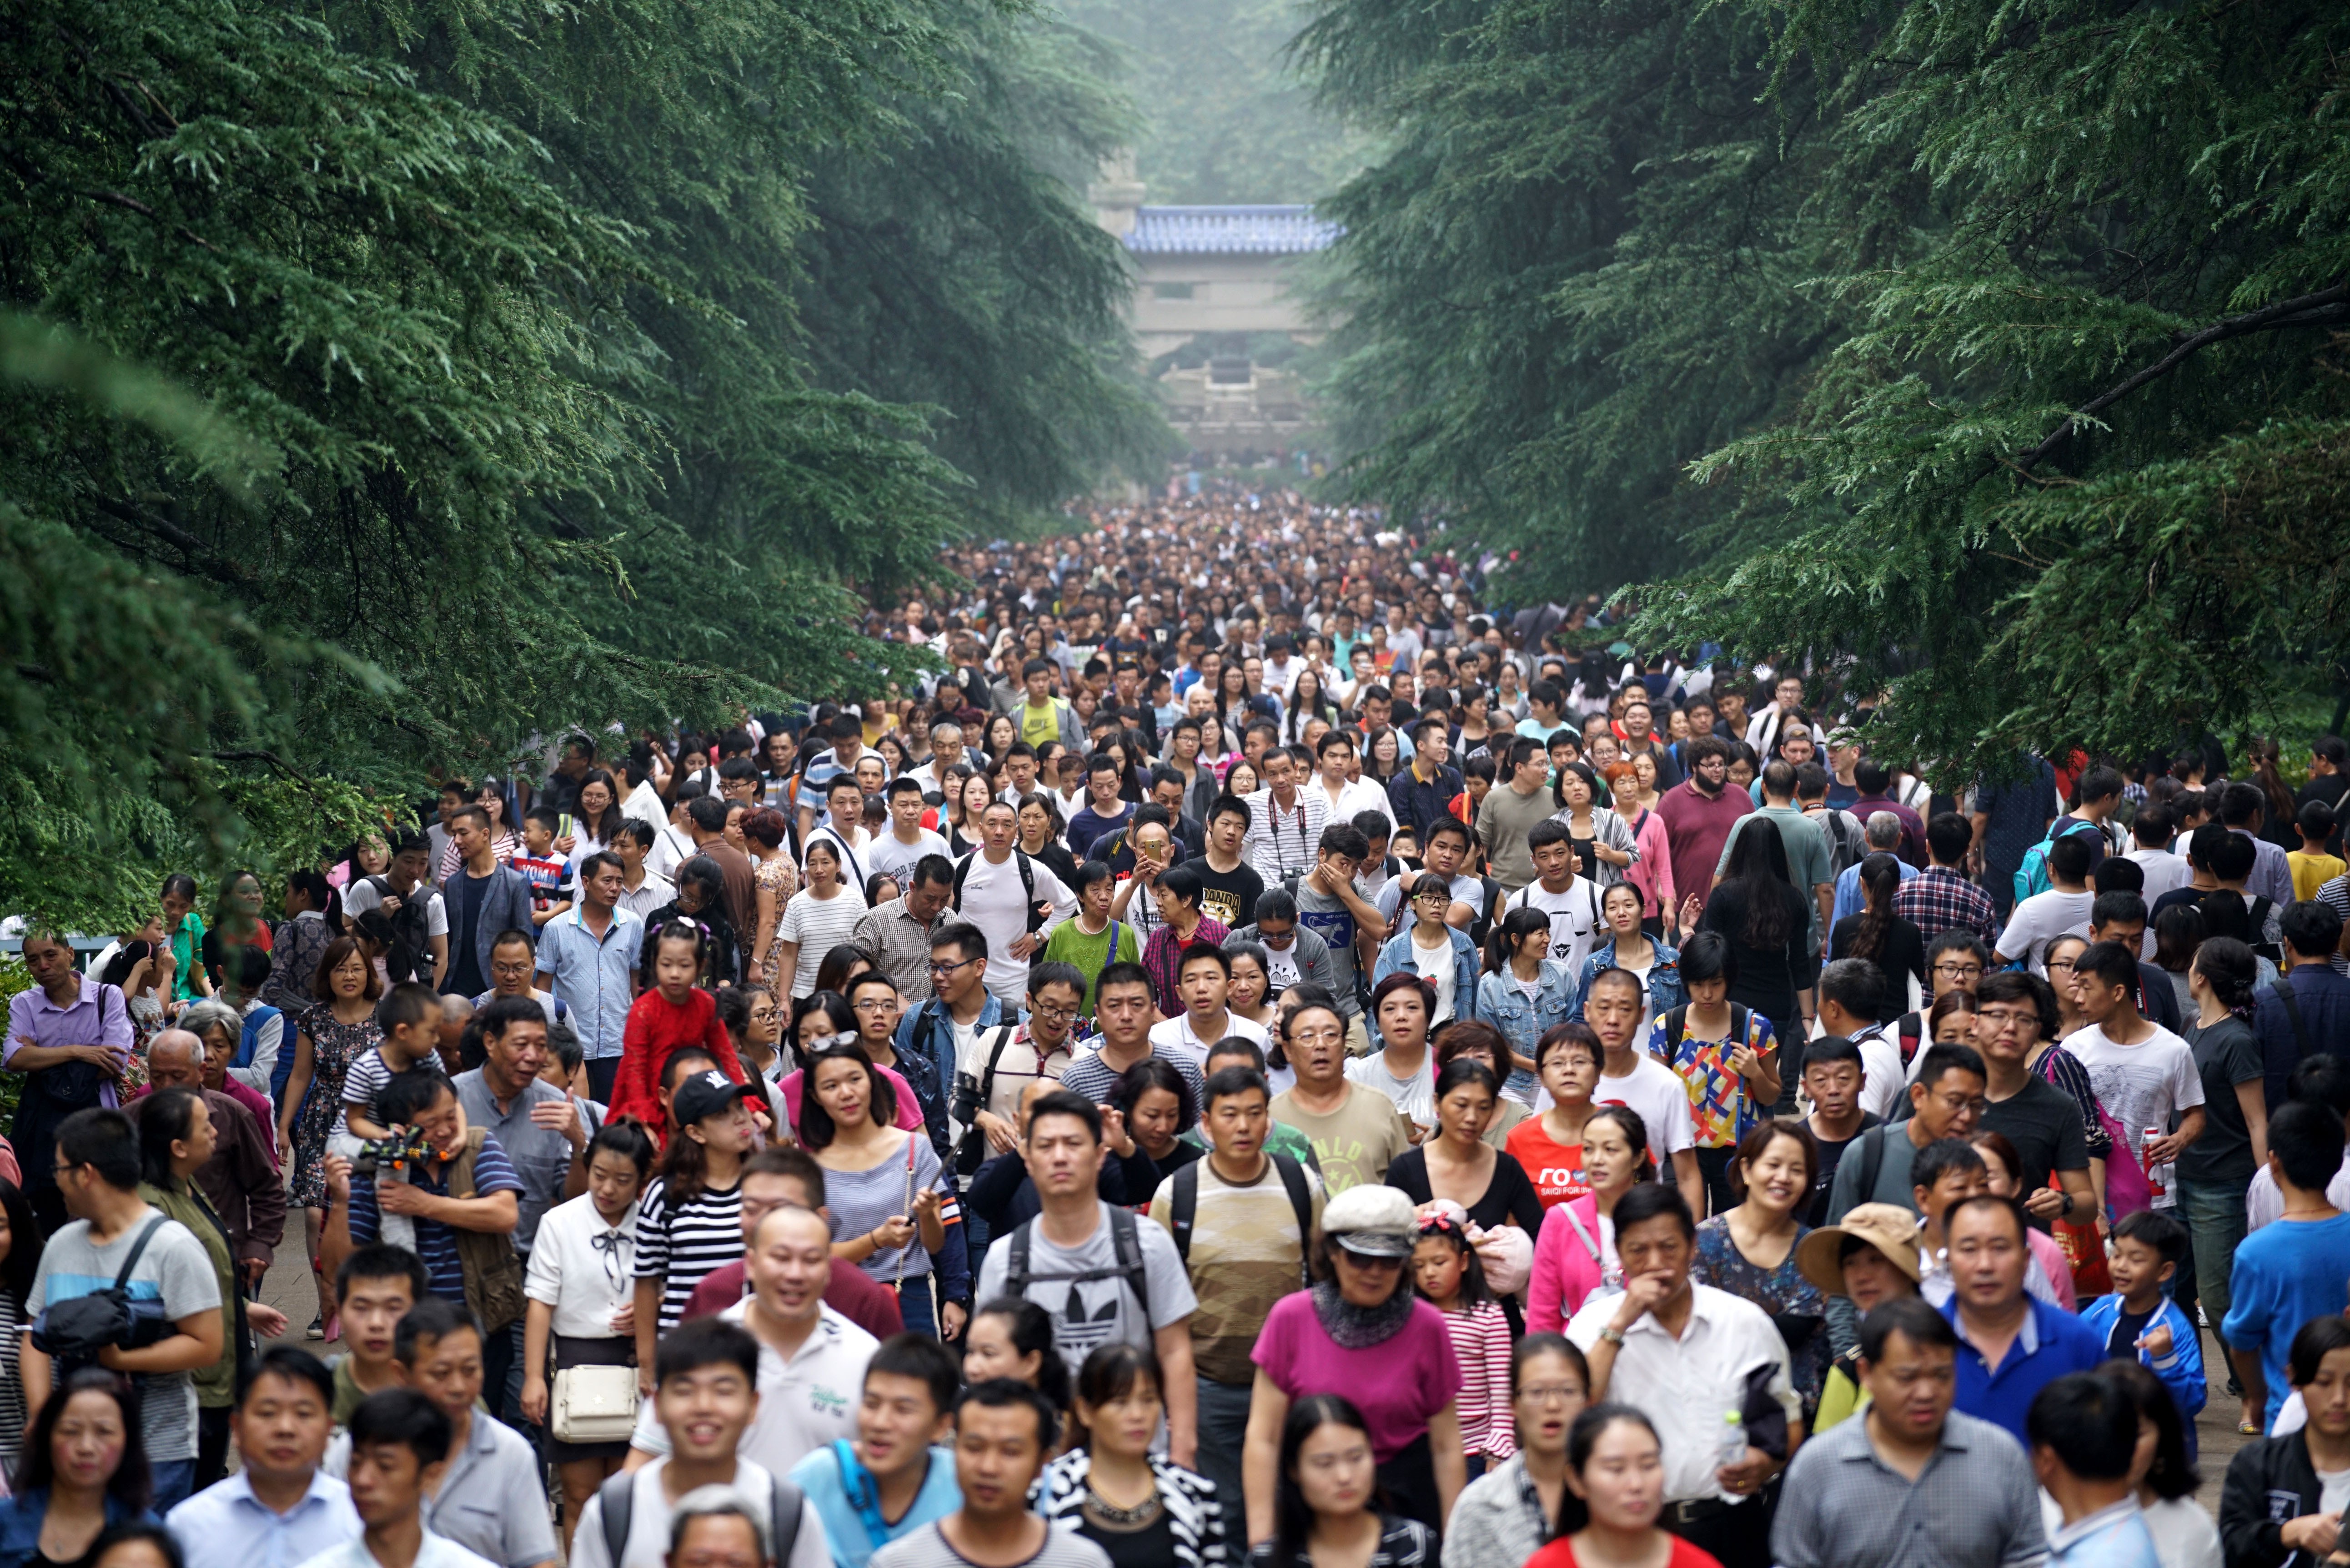 Twice a year China sees a mass migration of its citizens as it celebrates Golden Week. With the next holiday starting on Monday, we look at the staggering figures involved when half the country travels at the same time